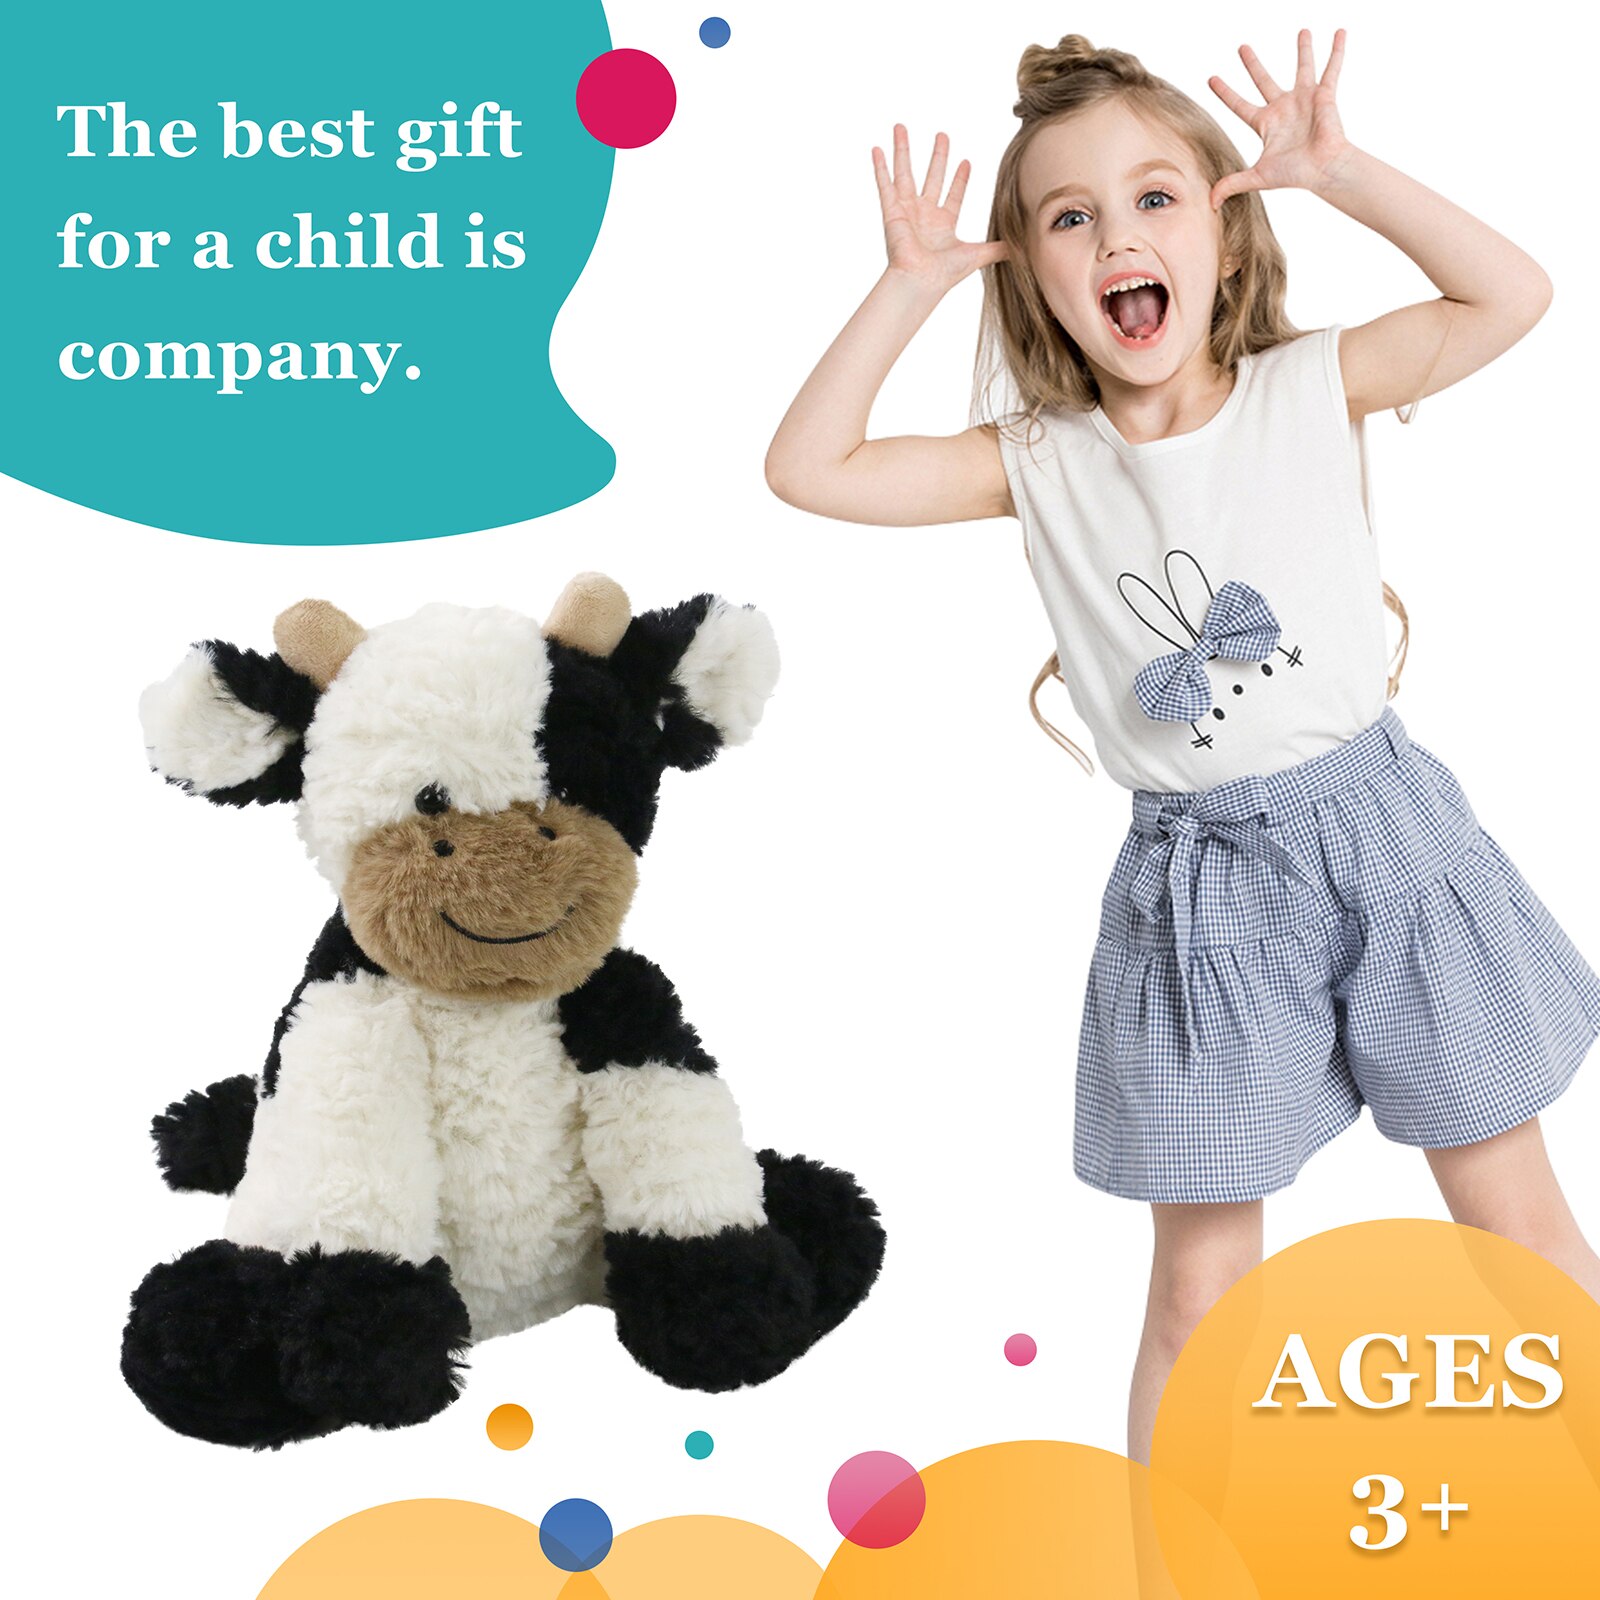 SpecialYou Dairy Cow Stuffed Animal Adorable Soft Plush Farm Animal Toy Great Birthday, White&Black, 9 inches